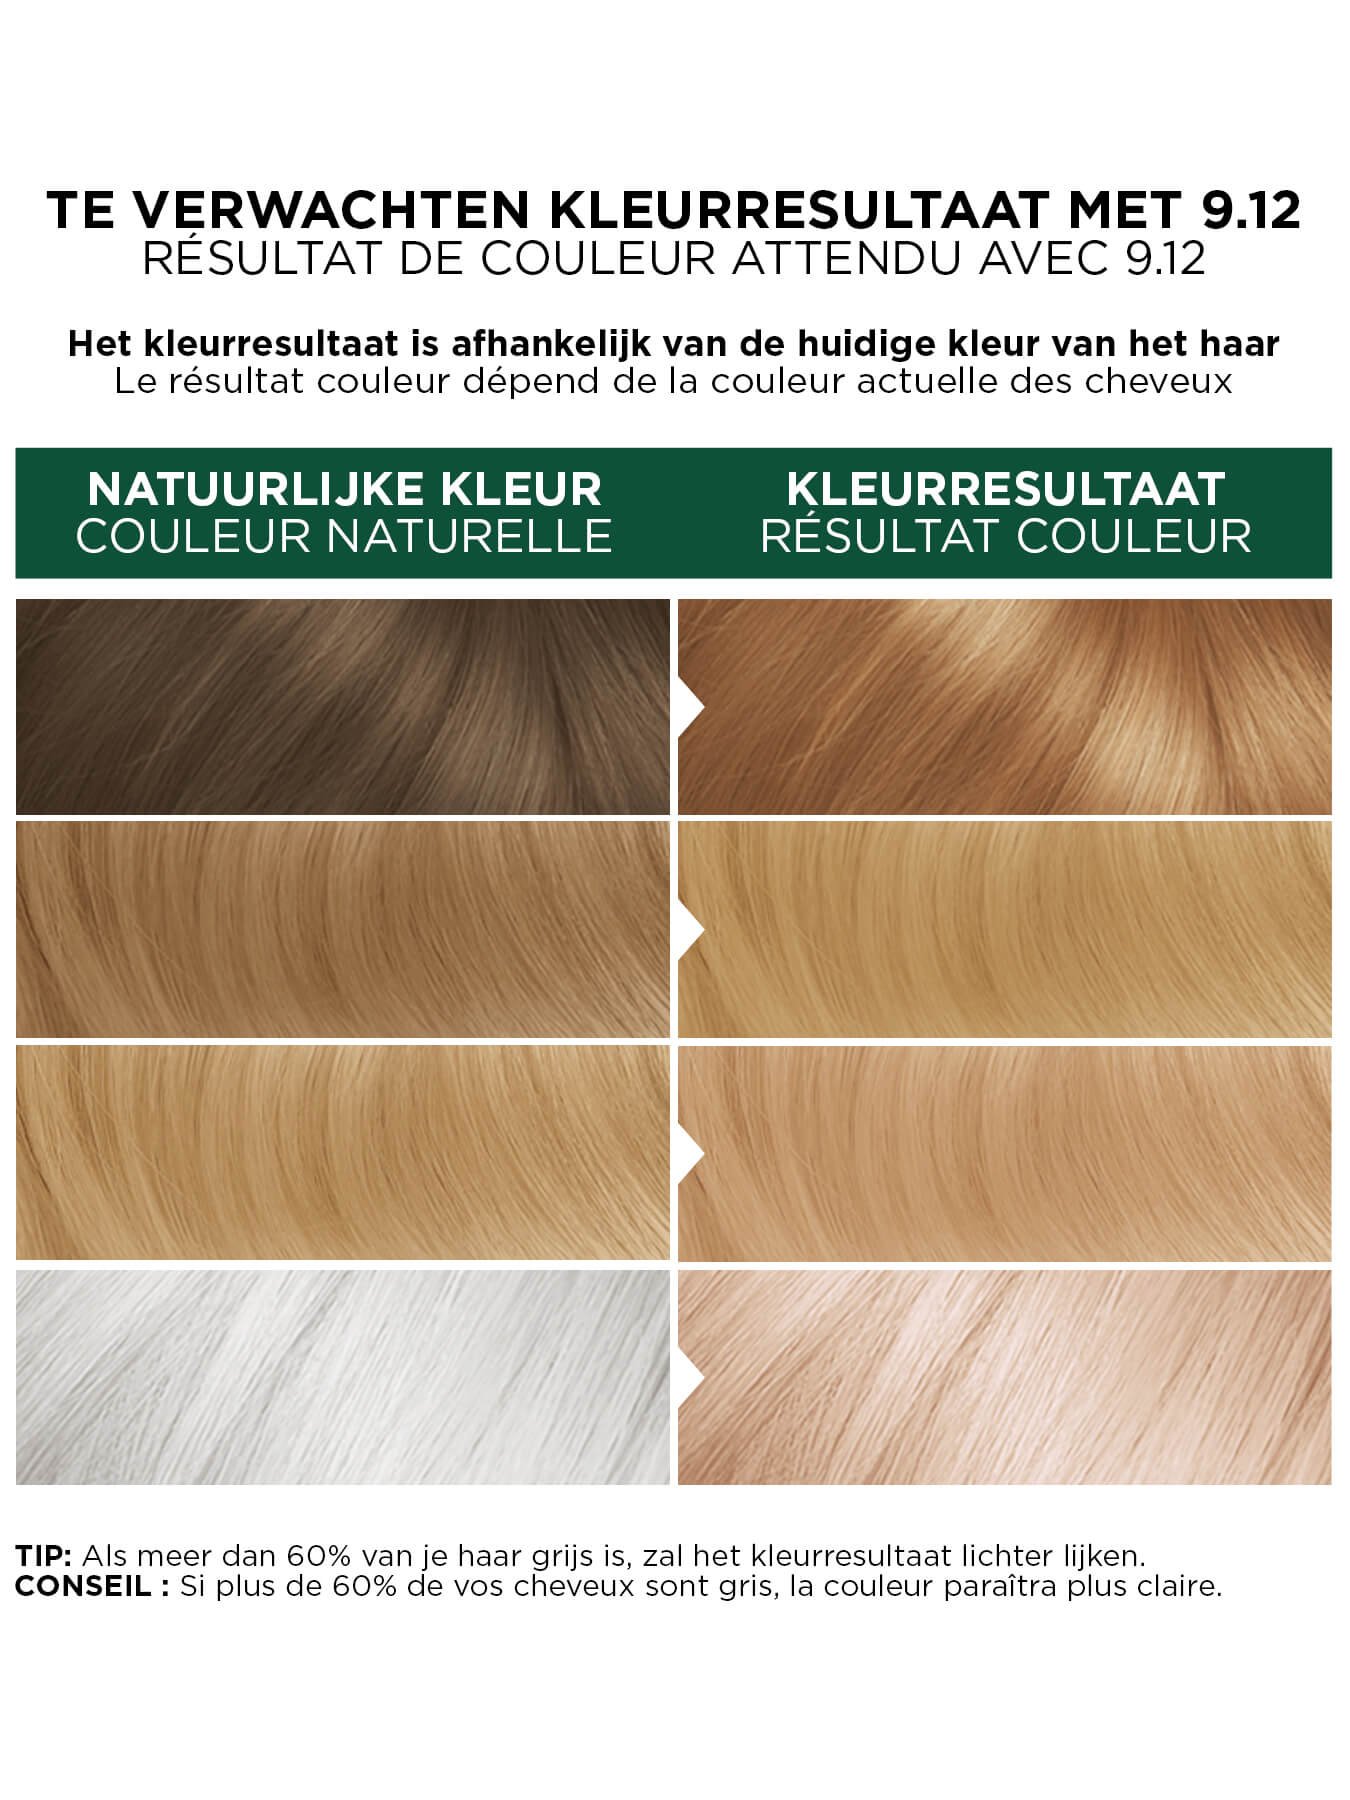 8127170 Belle Color Naturals Resizing 9 12 BE 1350x1800pxjpg master